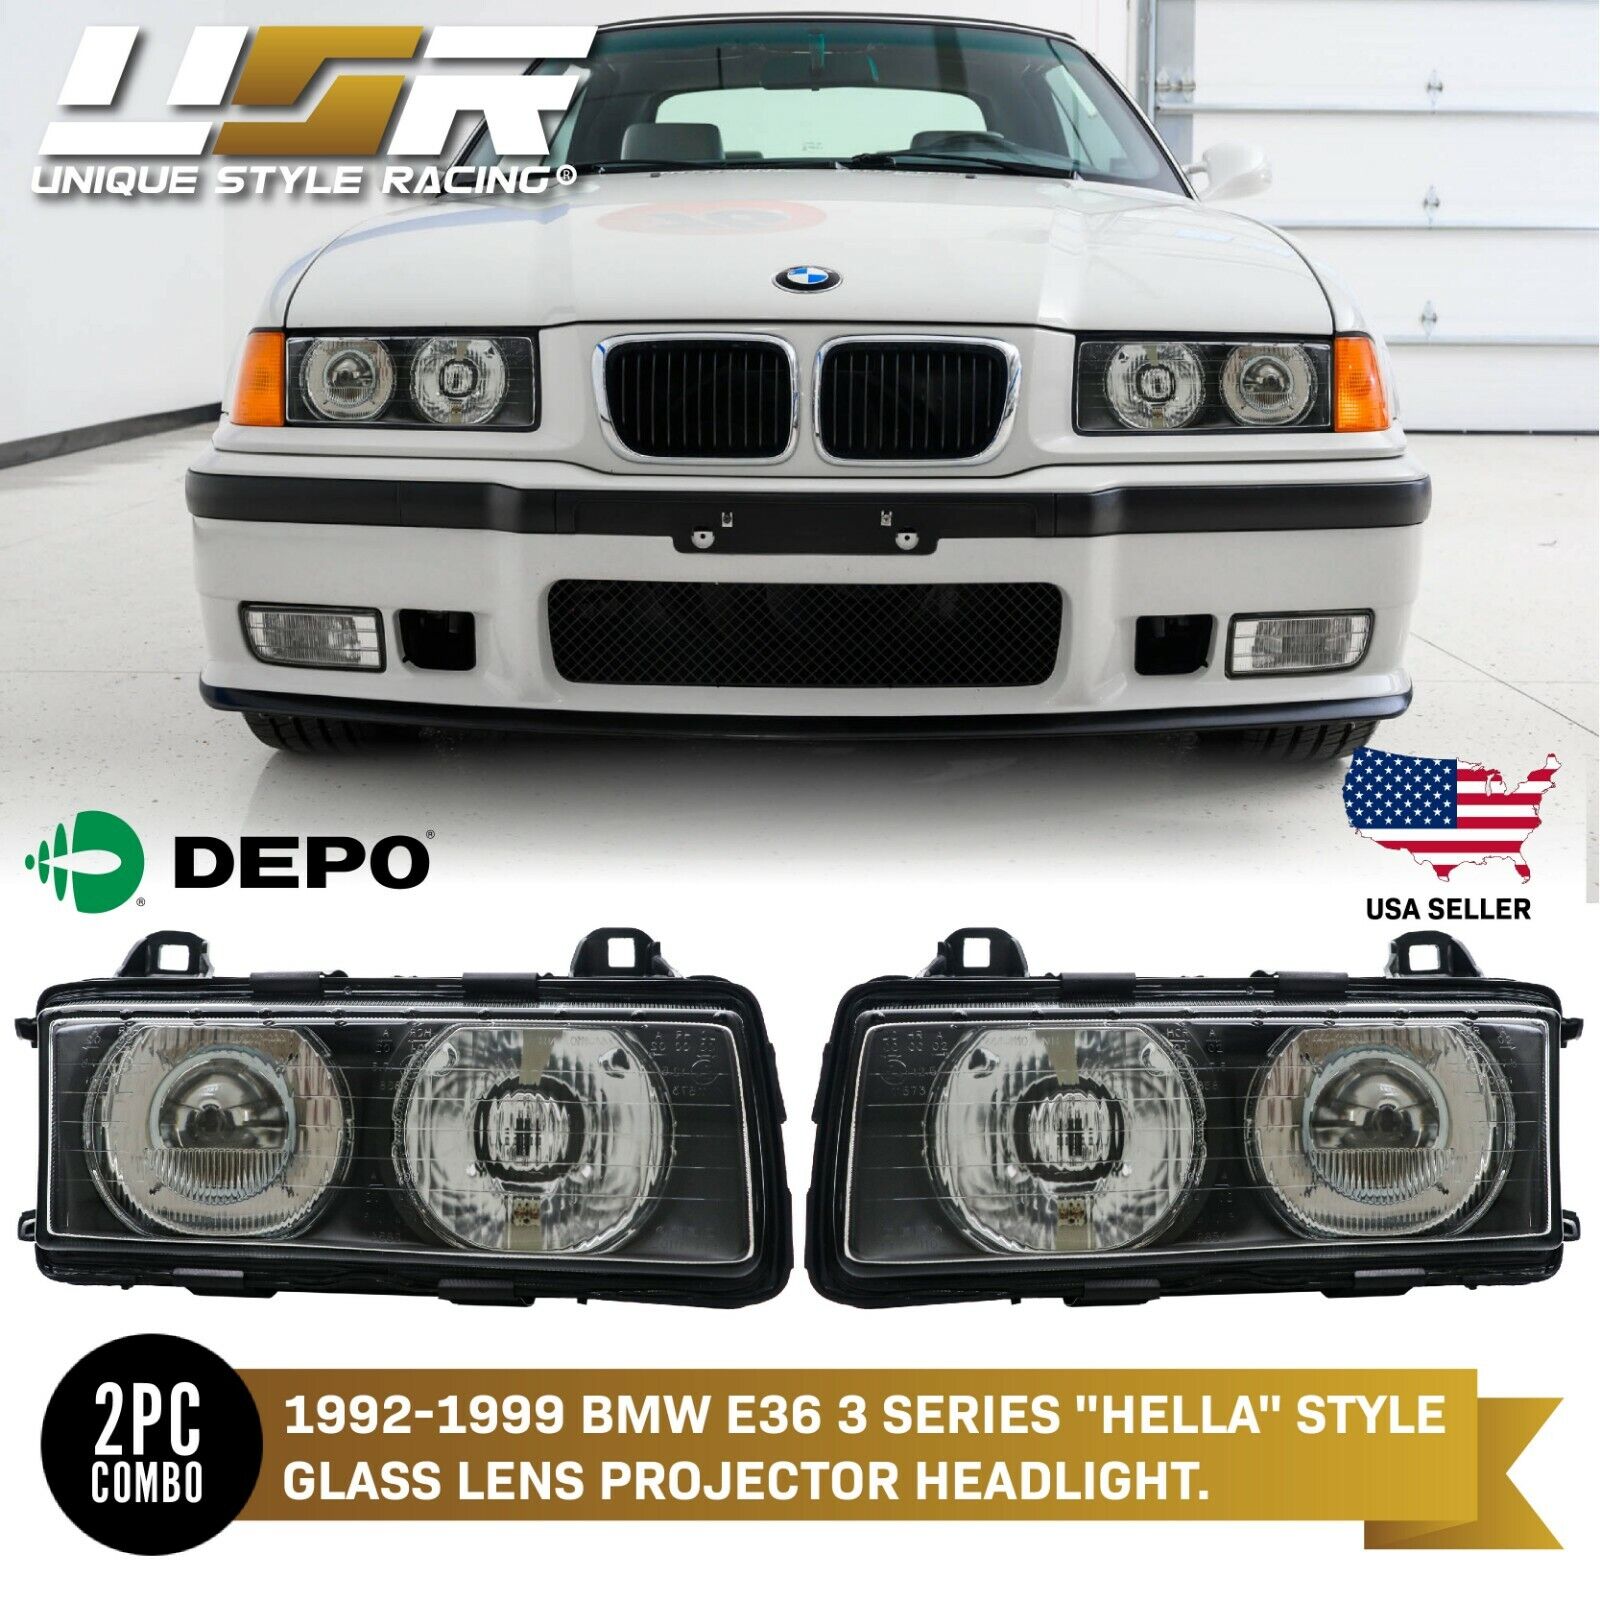 Euro GLASS Hella Style Ellipsoid Projector Headlight by DEPO for E36 3 Series